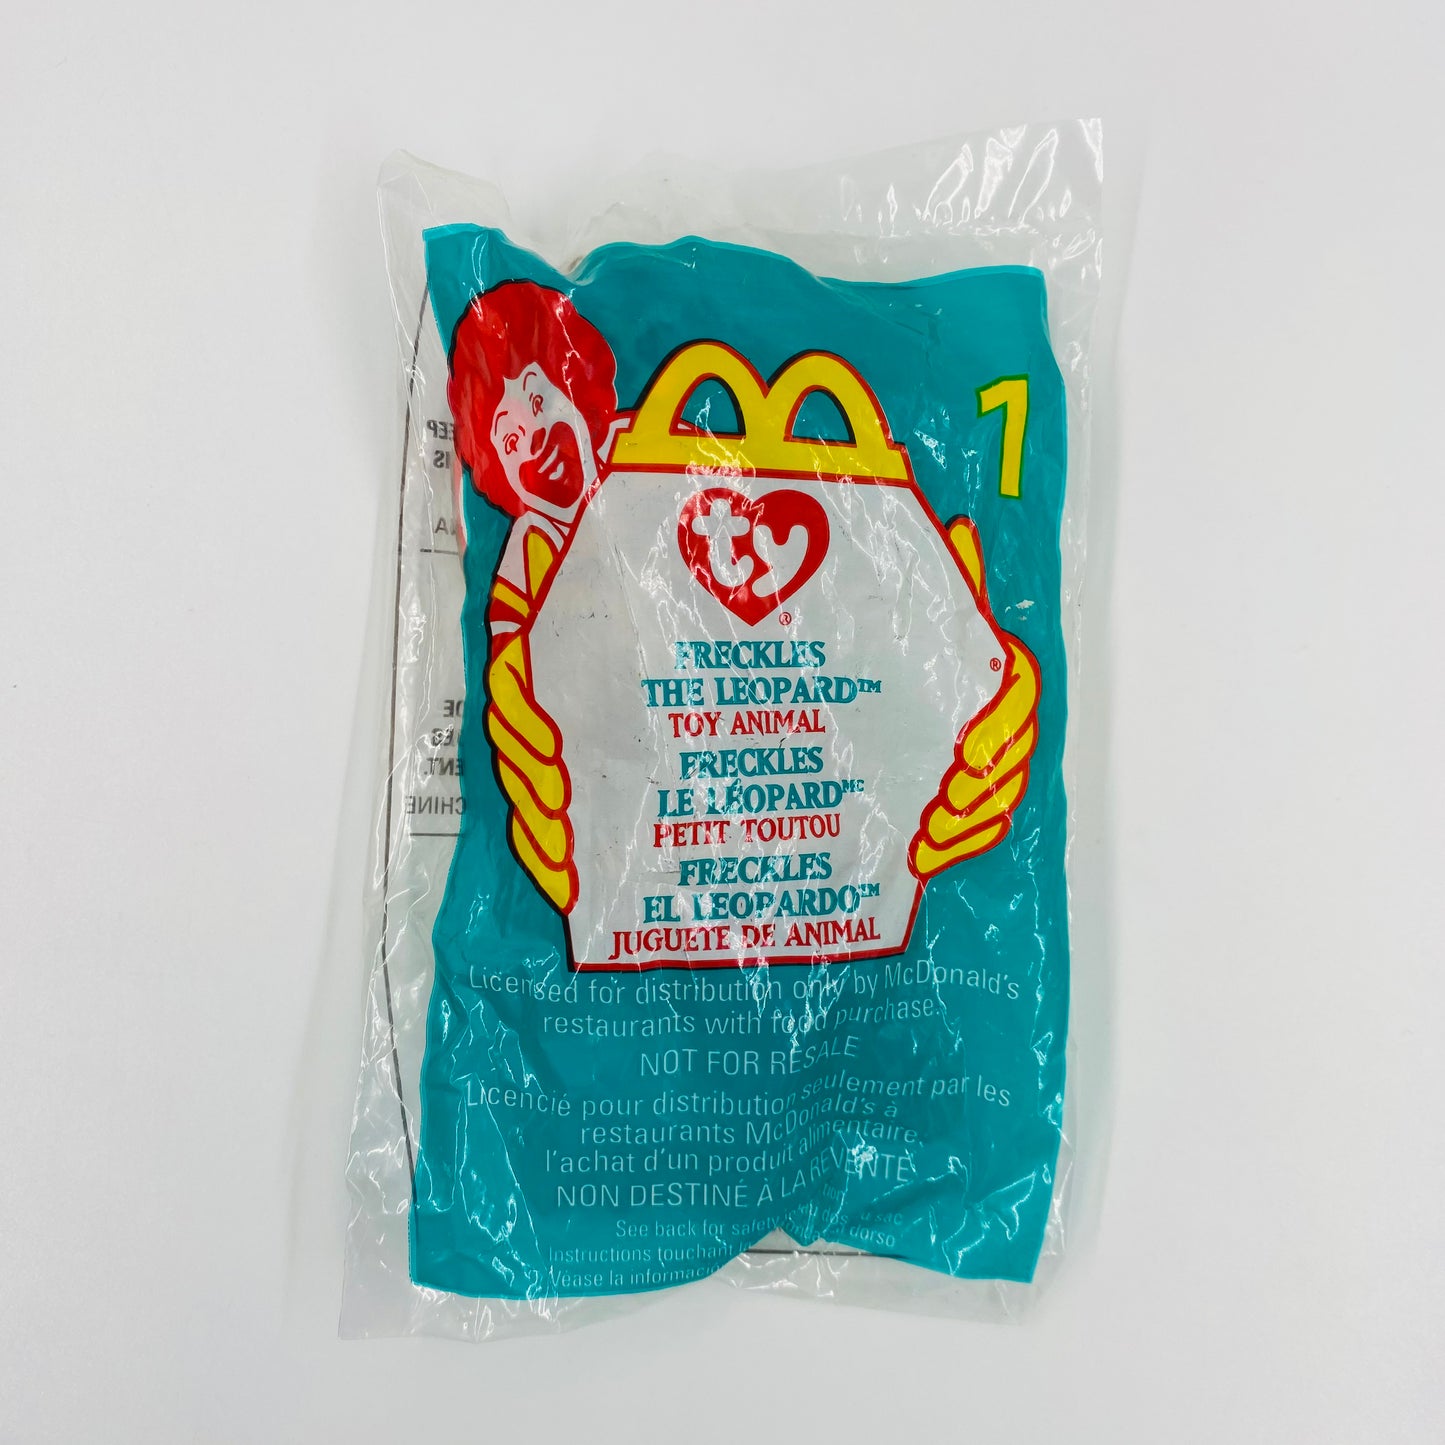 Teenie Beanie Babies Freckles the Leopard McDonald's Happy Meal bean bag plush toy animal (1999) bagged